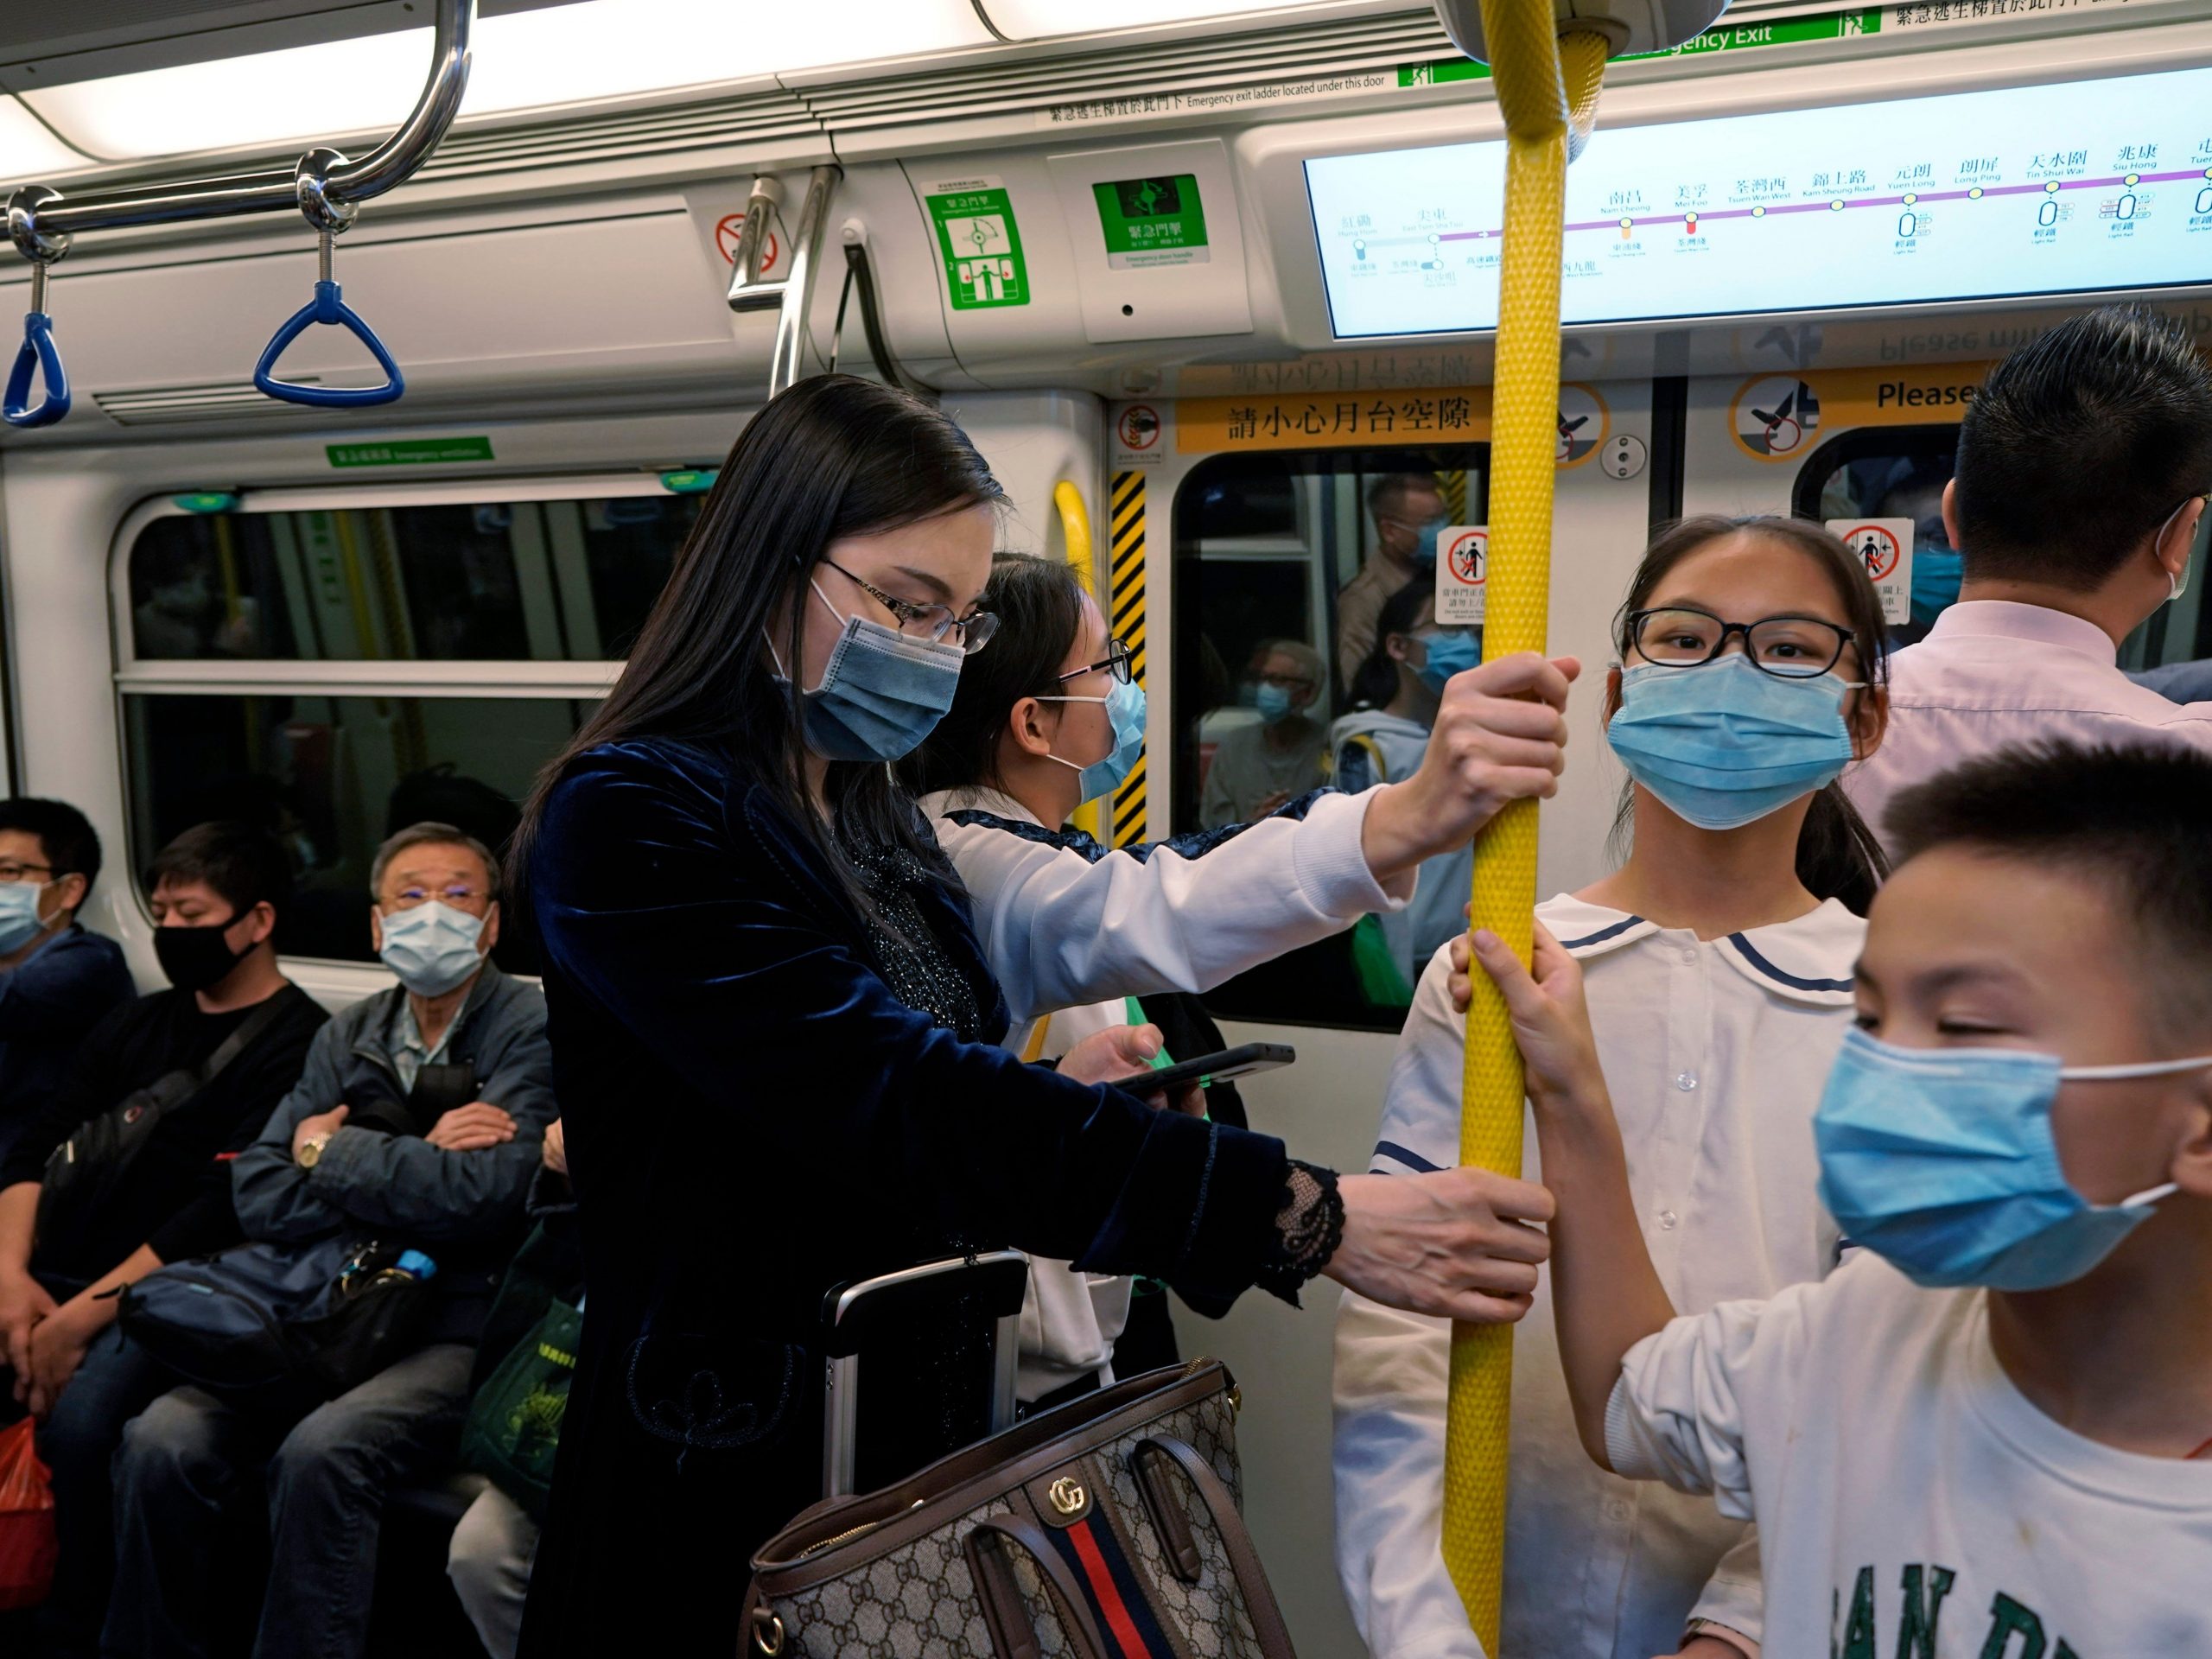 Passengers wear protective face masks on the subway in Hong Kong, Thursday, January 23, 2020.